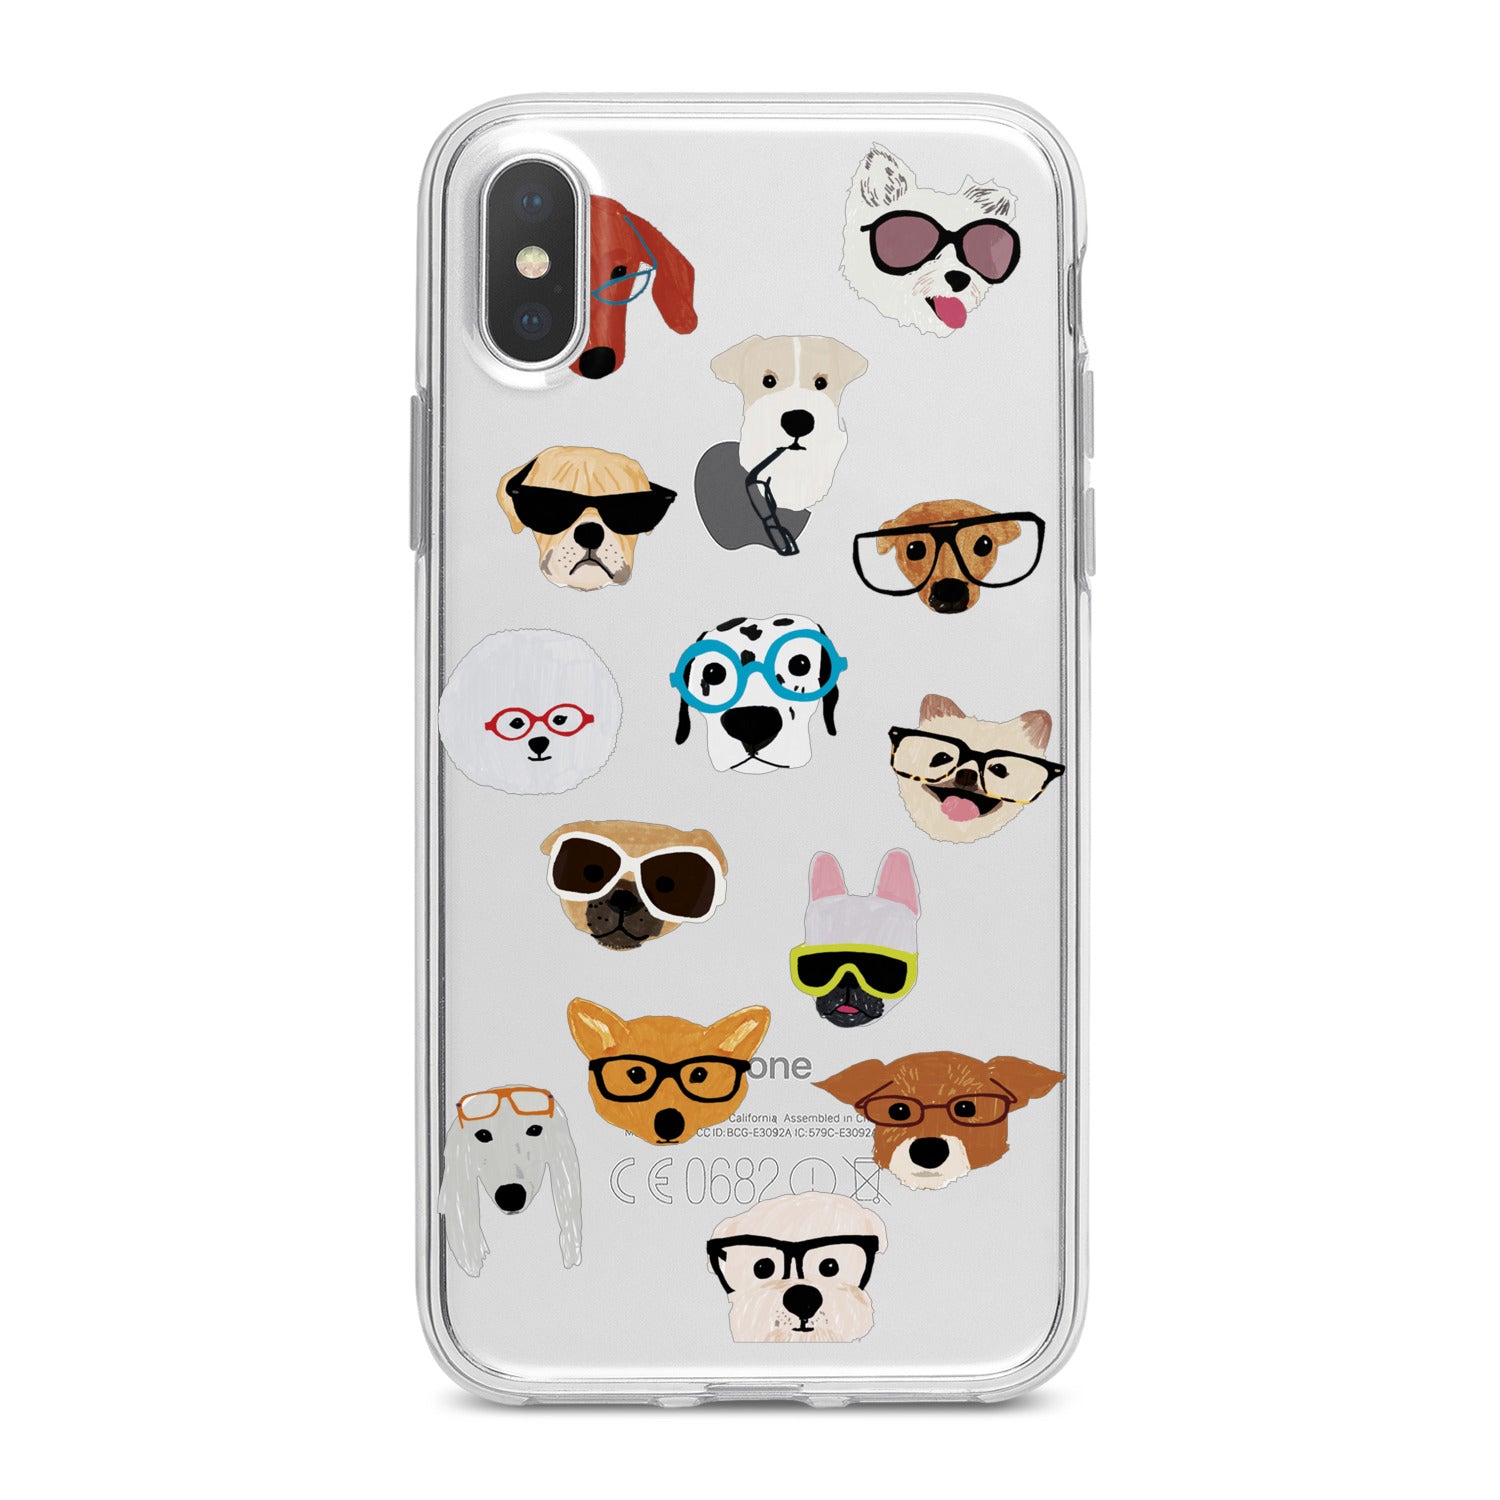 Lex Altern Fashion Dogs Phone Case for your iPhone & Android phone.